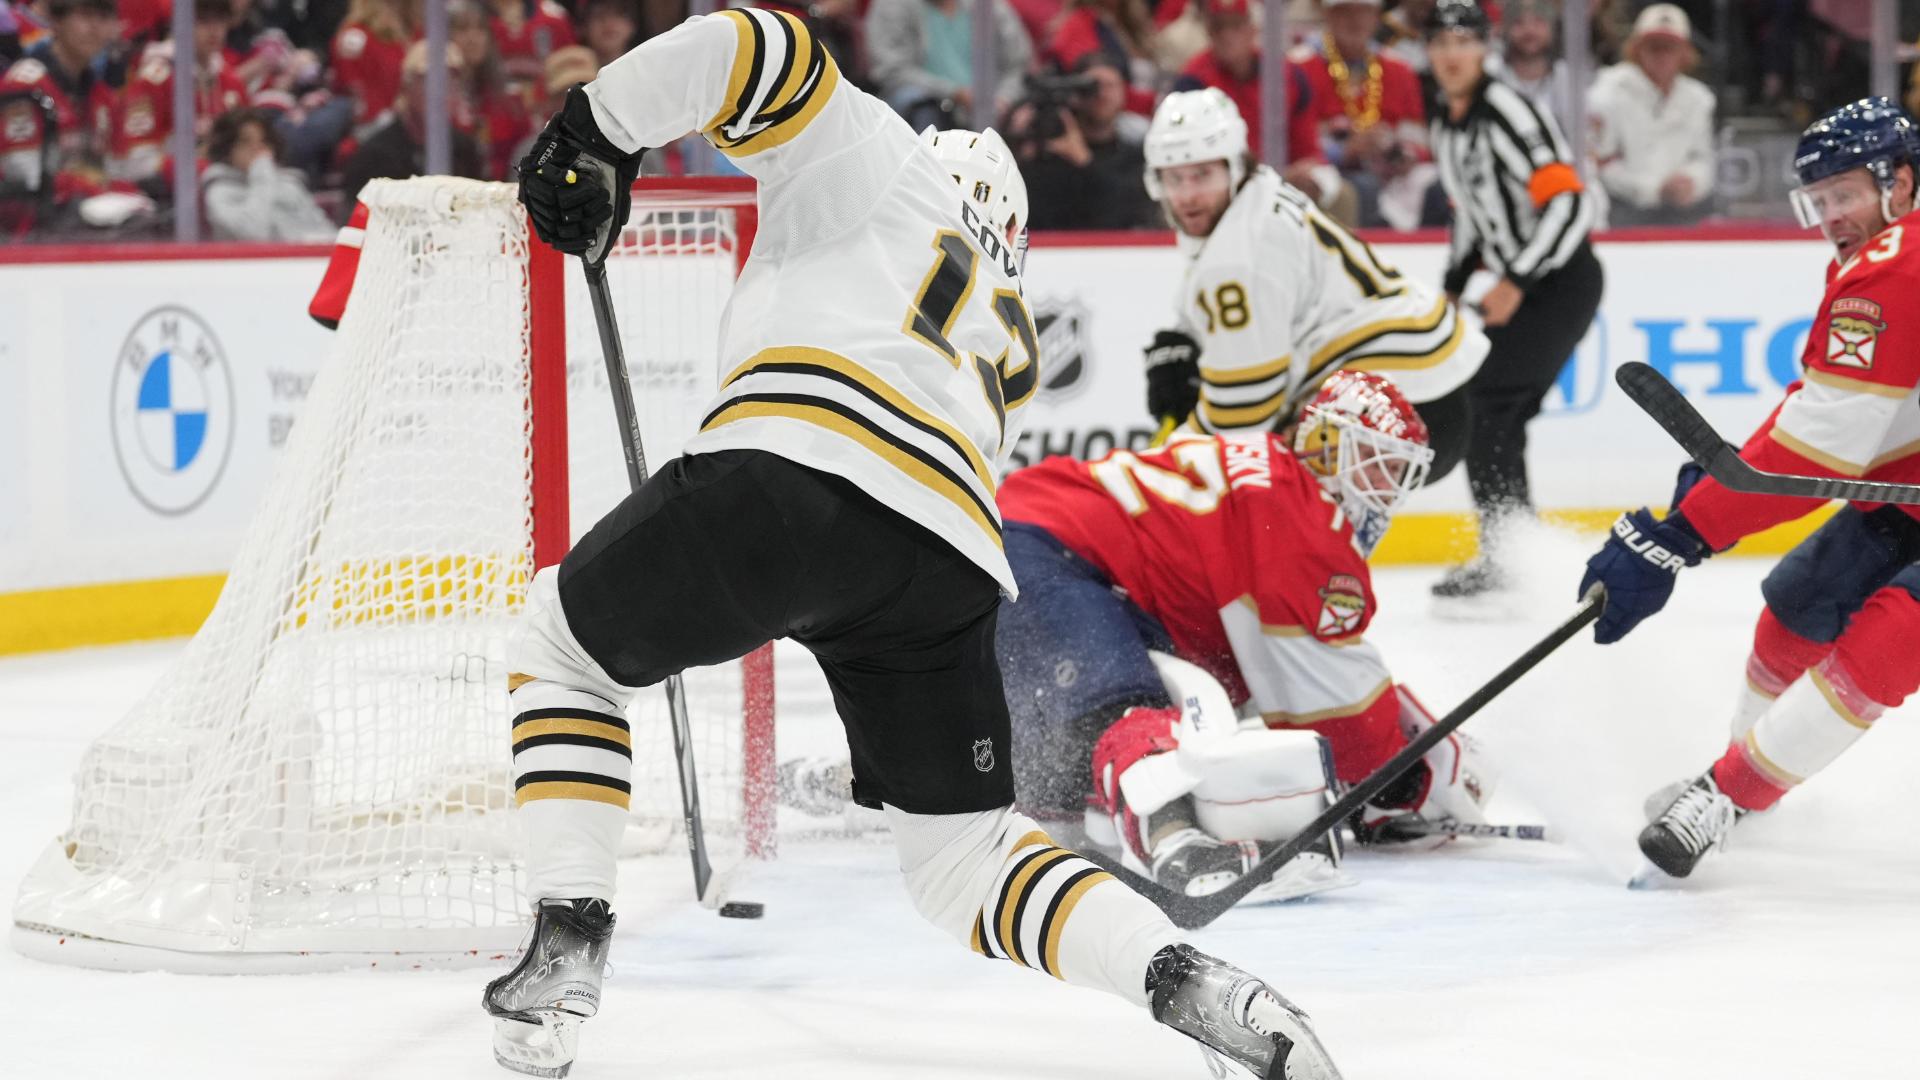 Charlie Coyle strikes first with goal for Bruins